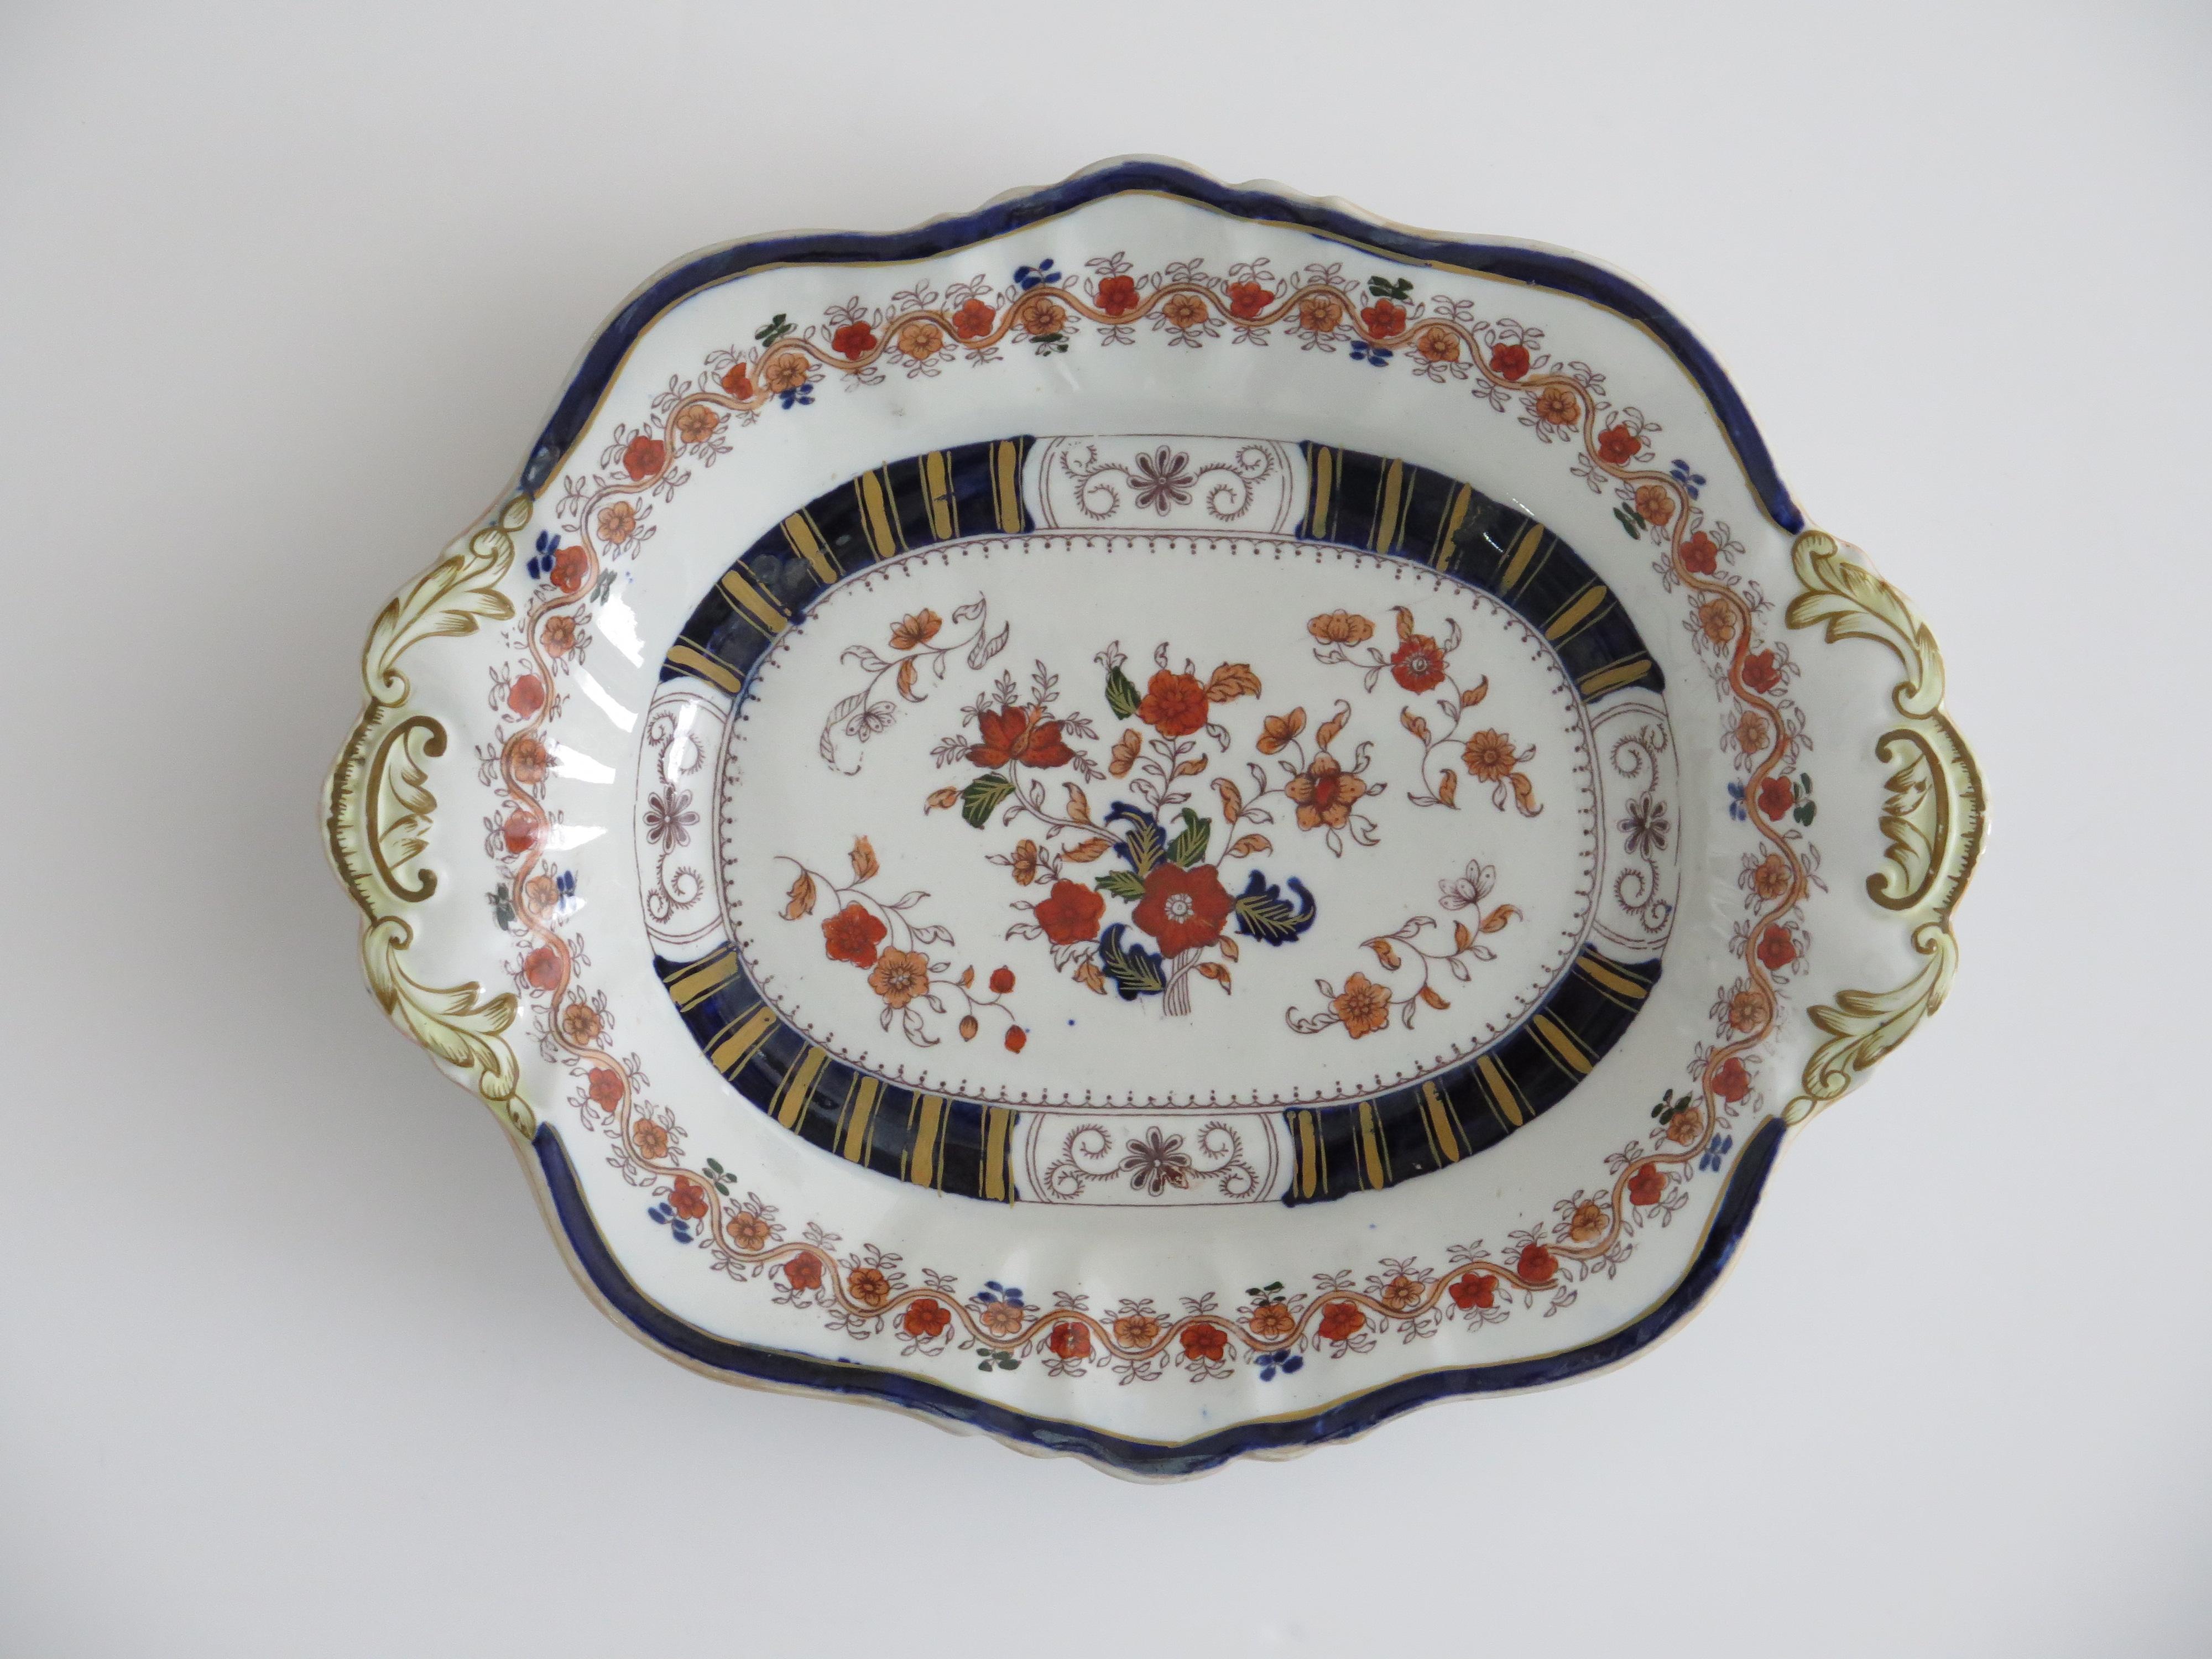 This is a very decorative serving dish or platter, made by Mason's Ironstone, Lane Delph, England in a very colourful floral pattern, dating to the late Georgian English Regency period, circa 1825 to 1830.

This Desert dish or platter has a